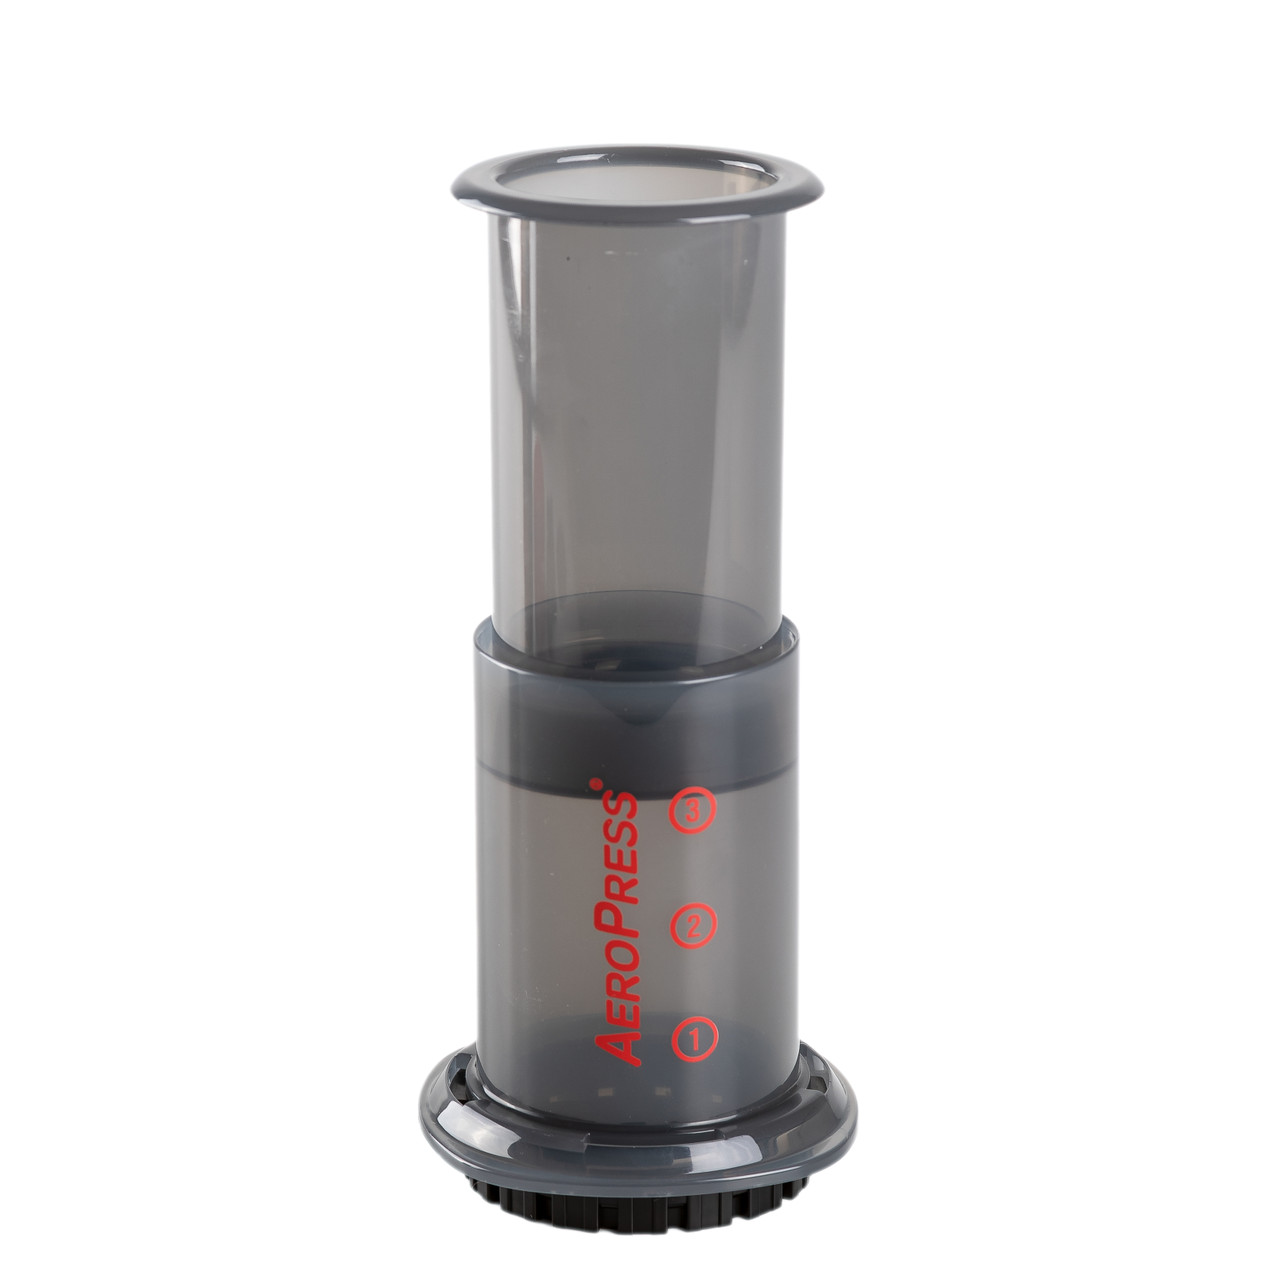 Aeropress Go - What Is It and How to Use it?